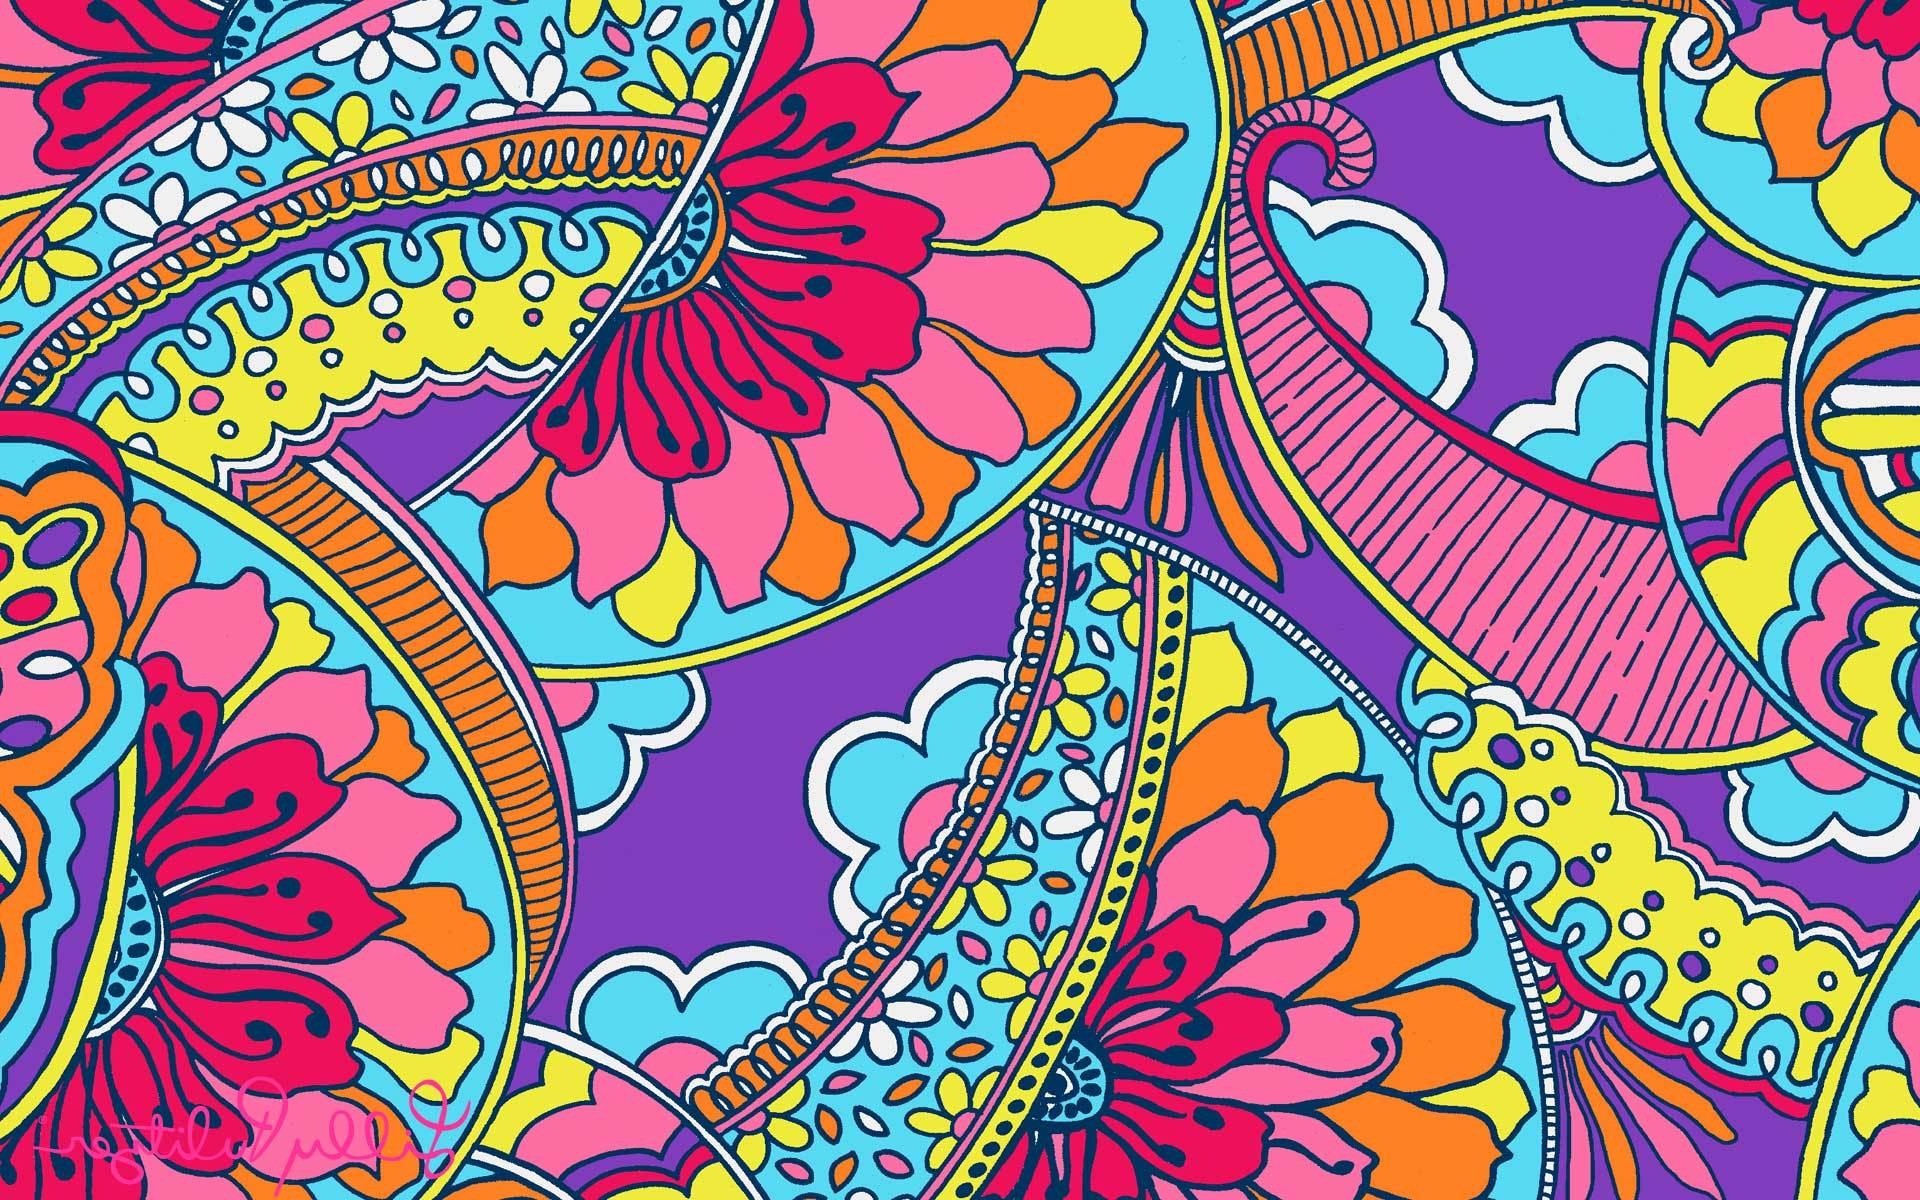 1920x1200 0 Lilly Pulitzer Laptop Wallpaper Lilly Pulitzer Patterns 2015 | wallpaper.